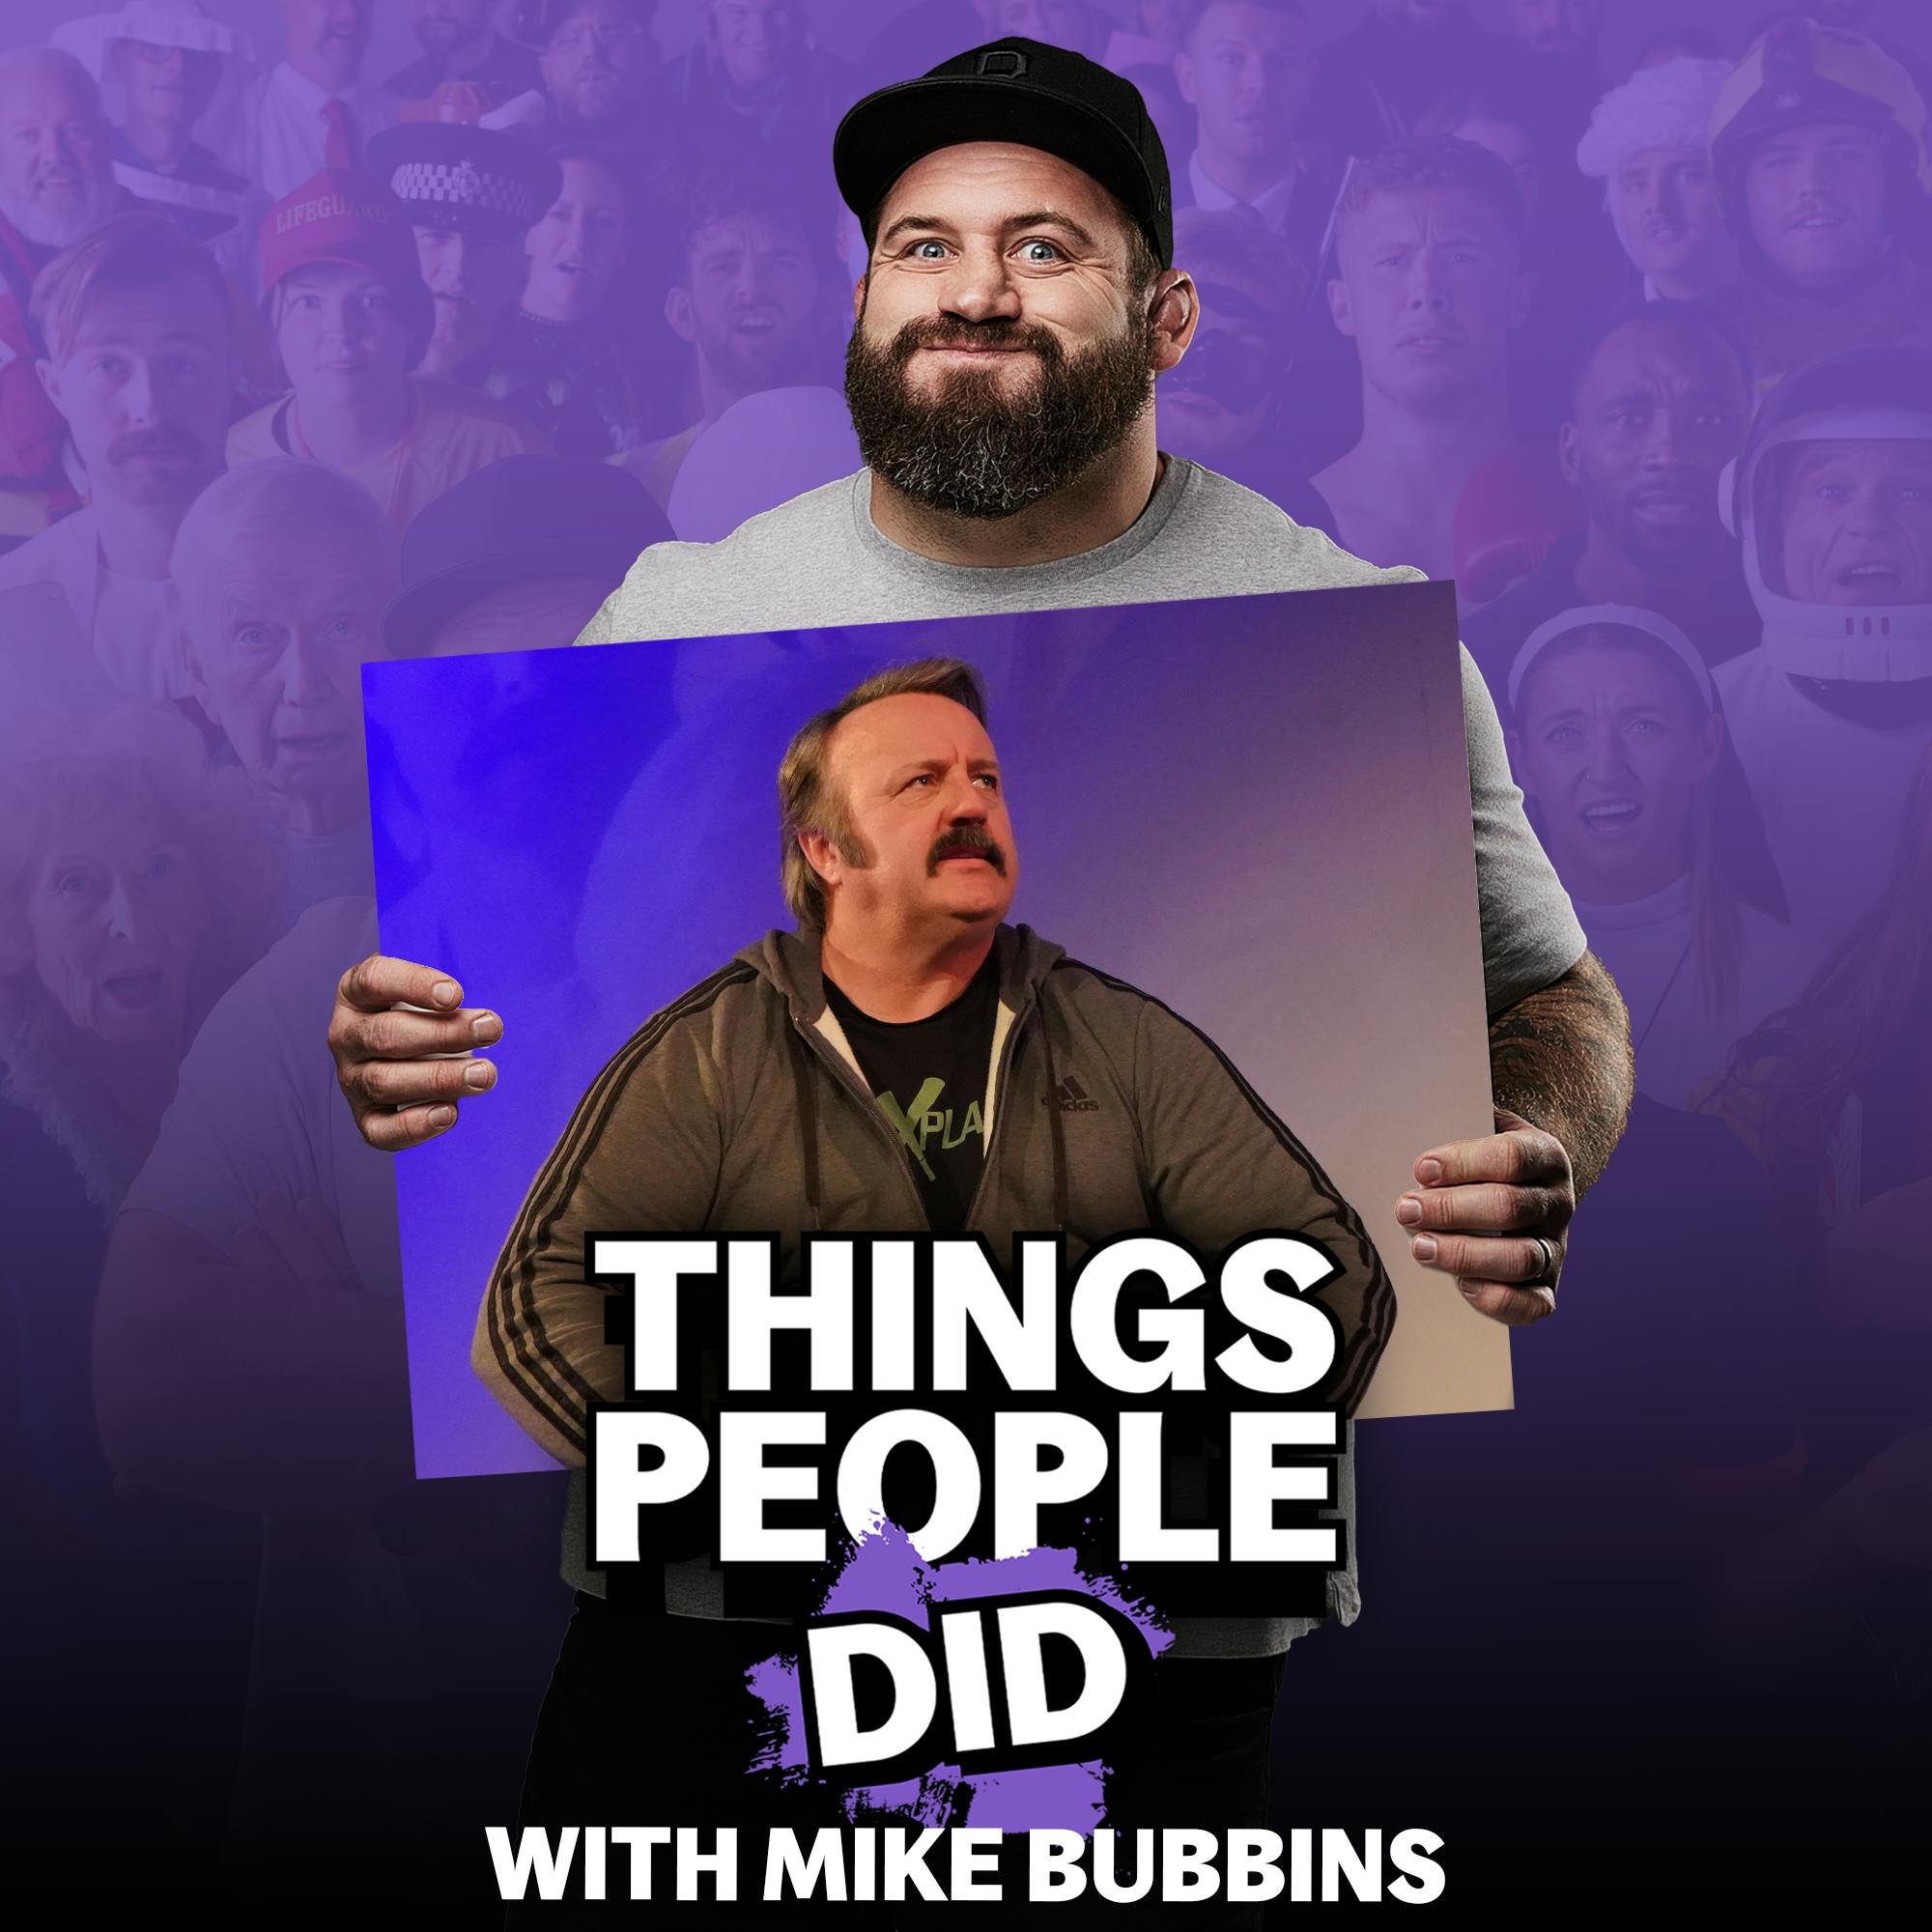 Things People Did, with Mike Bubbins: Tesco checkouts, bodybuilding, and being a world class Elvis